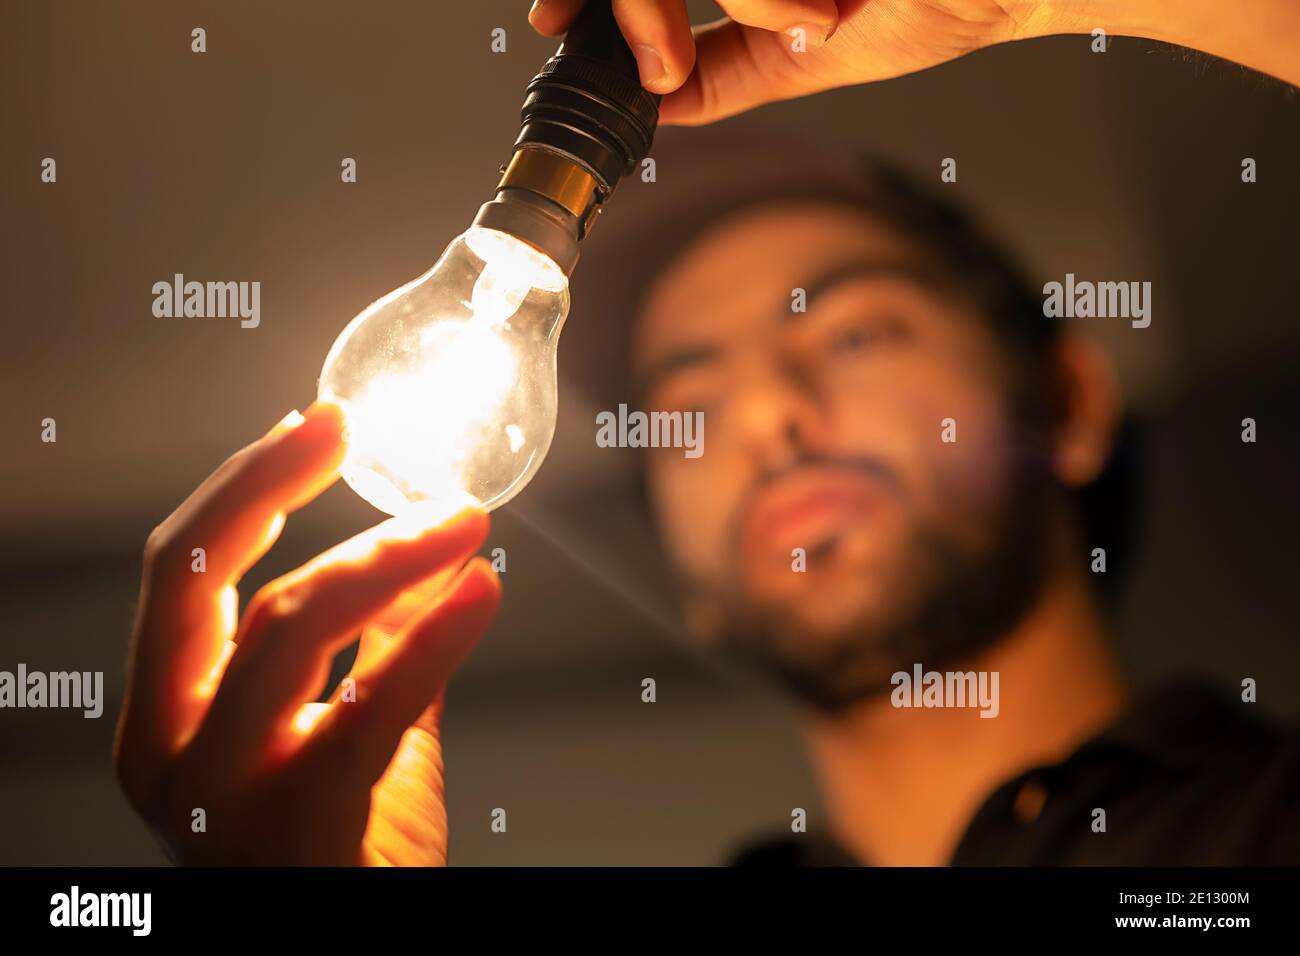 AN ELECTRICIAN HOLDING A WELL LIT ELECTRIC BULB Stock Photo